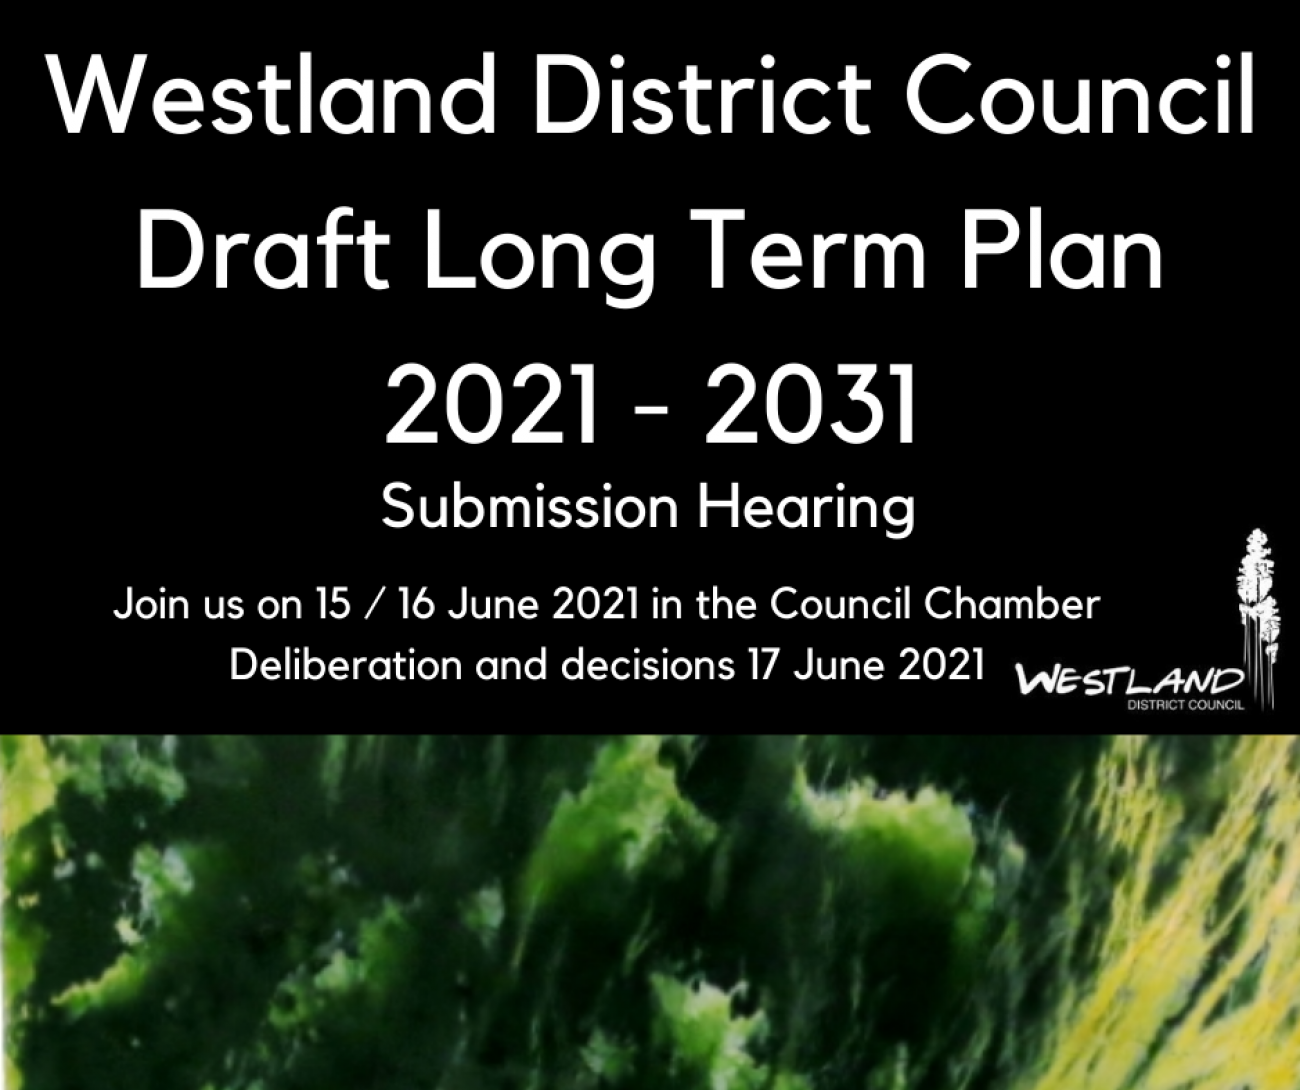 Councillors’ decisions on the Long Term Plan submissions